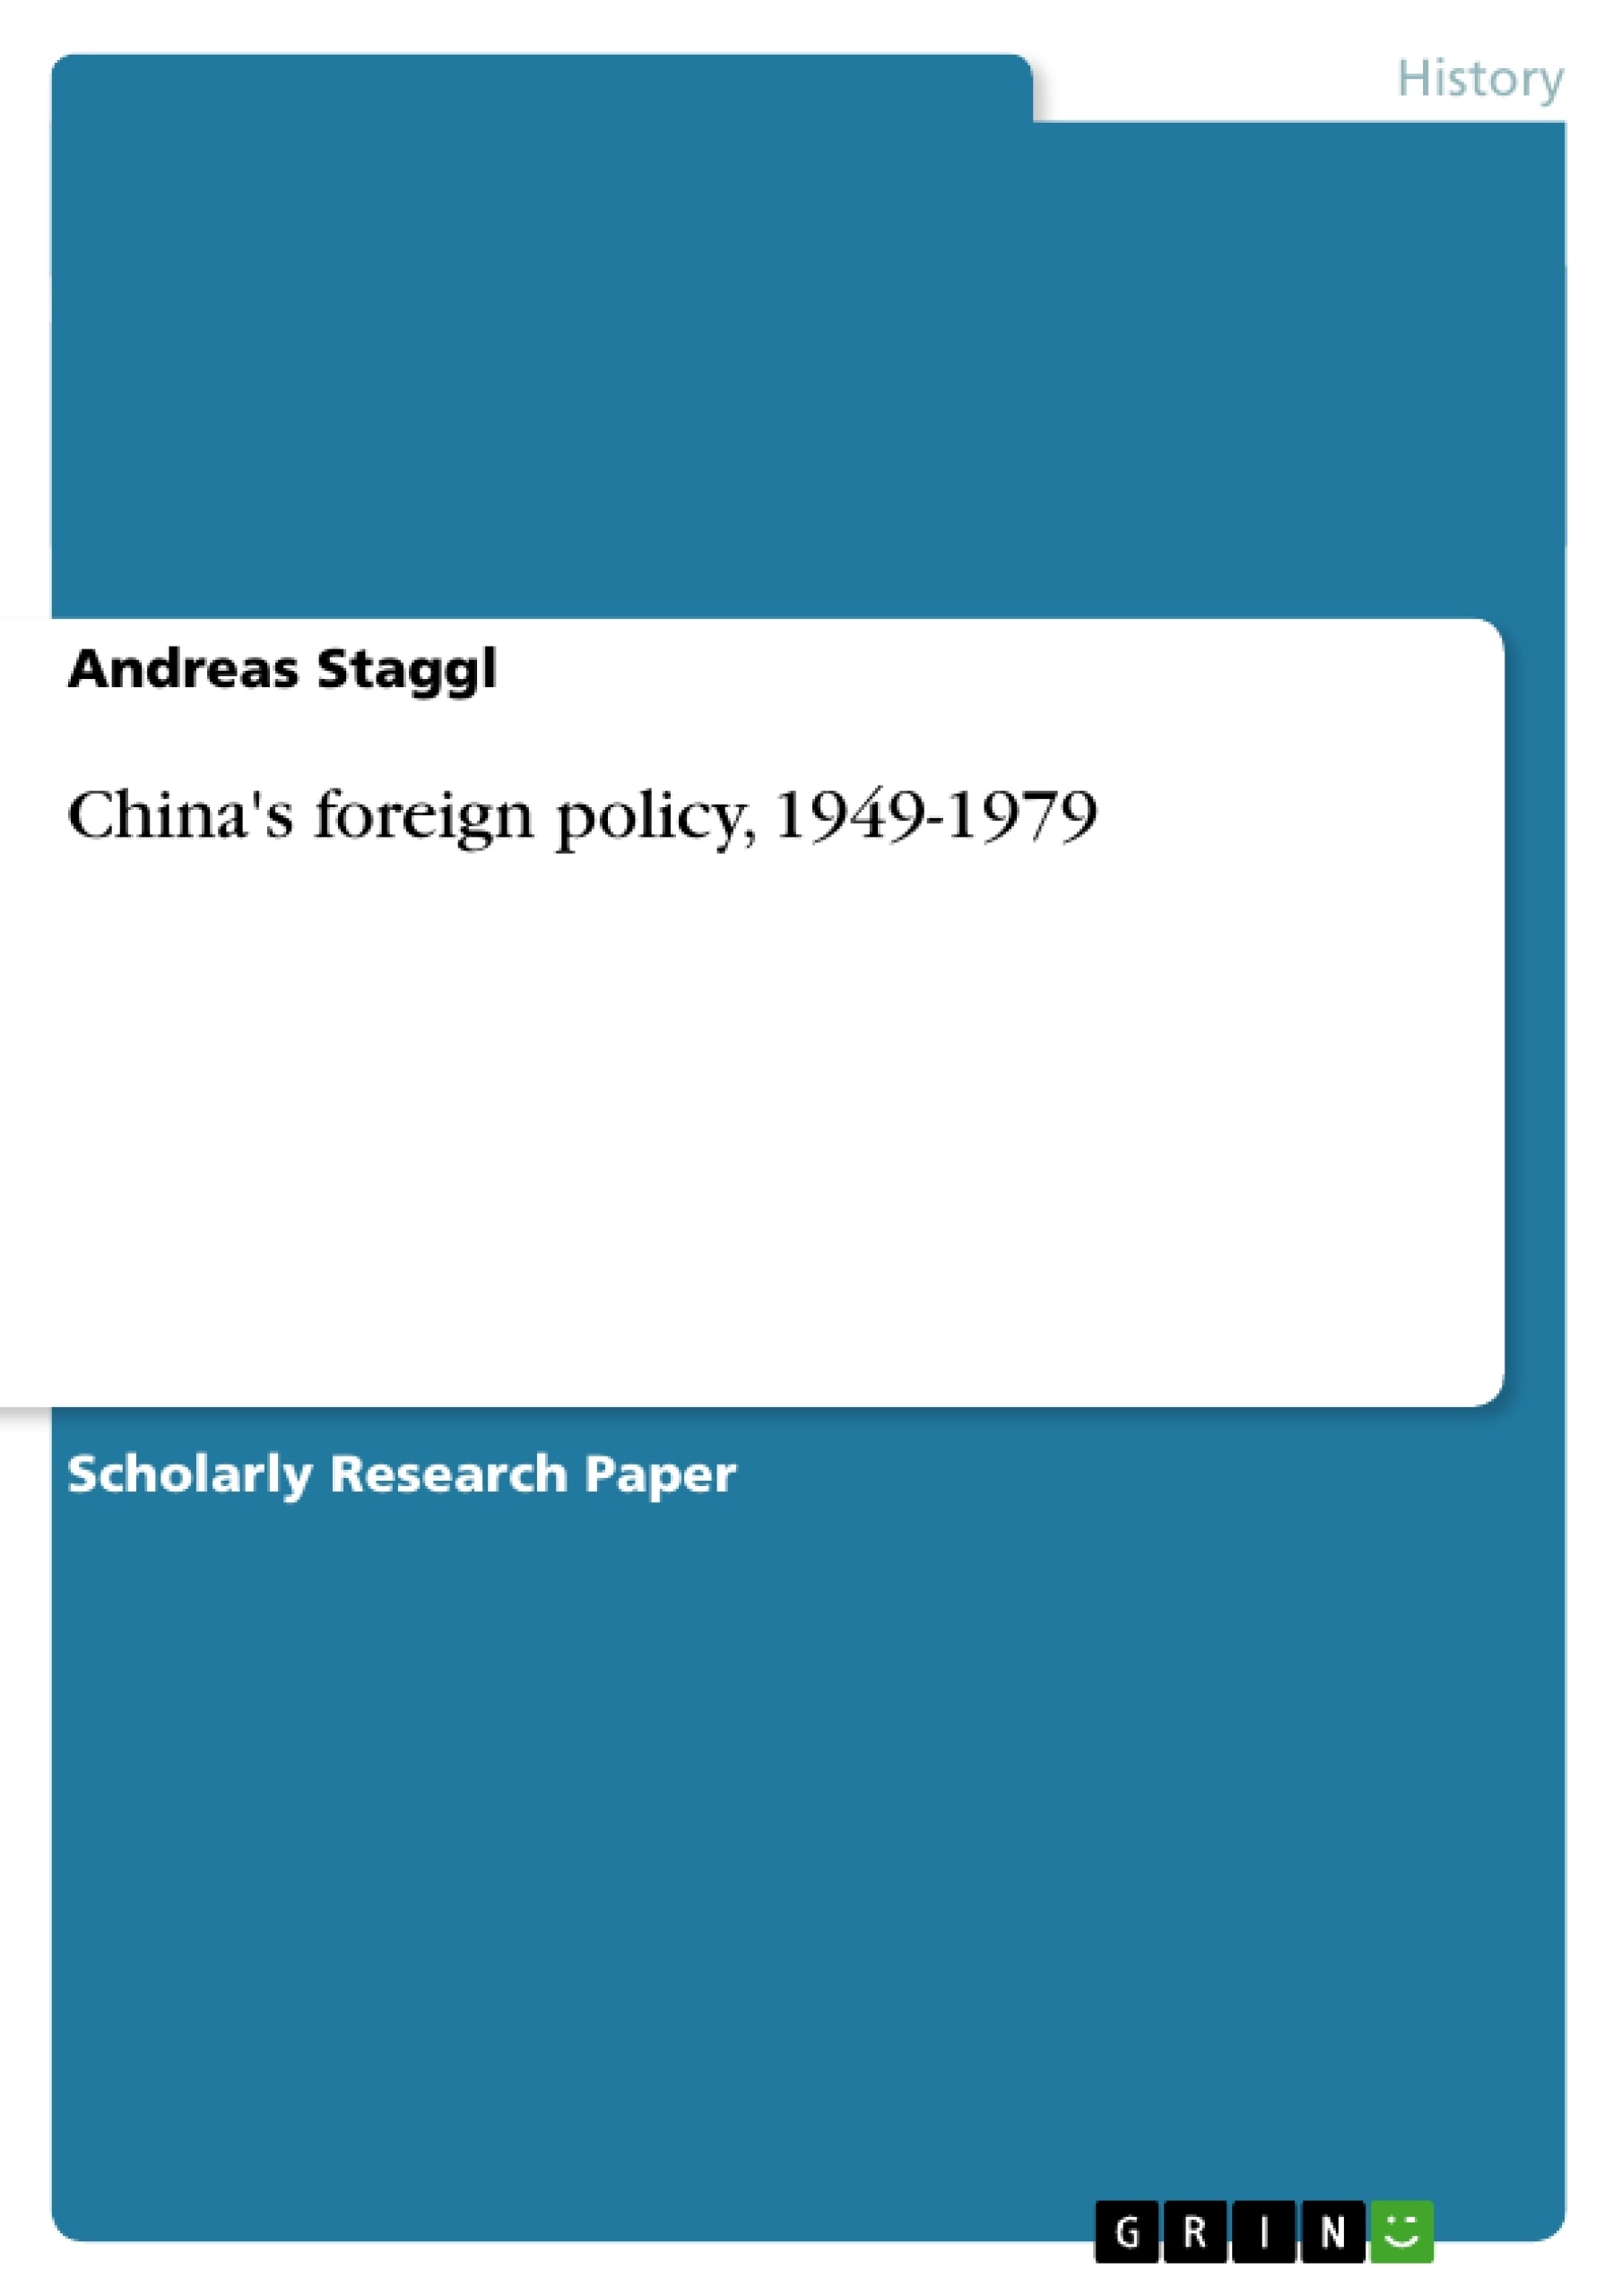 Title: China's foreign policy, 1949-1979